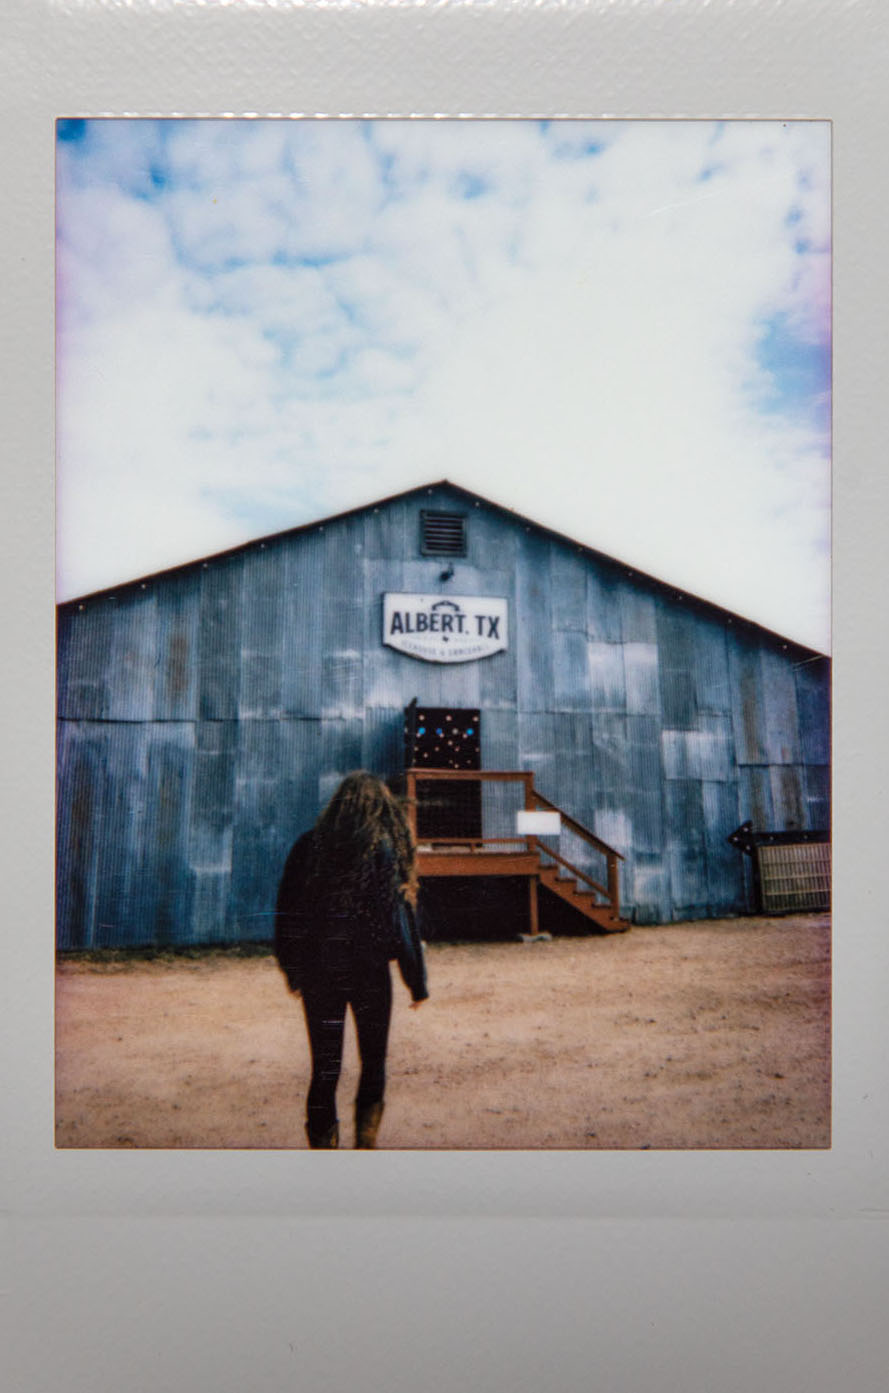 A Polaroid picture of a woman walking up toward a metal-sided building reading 